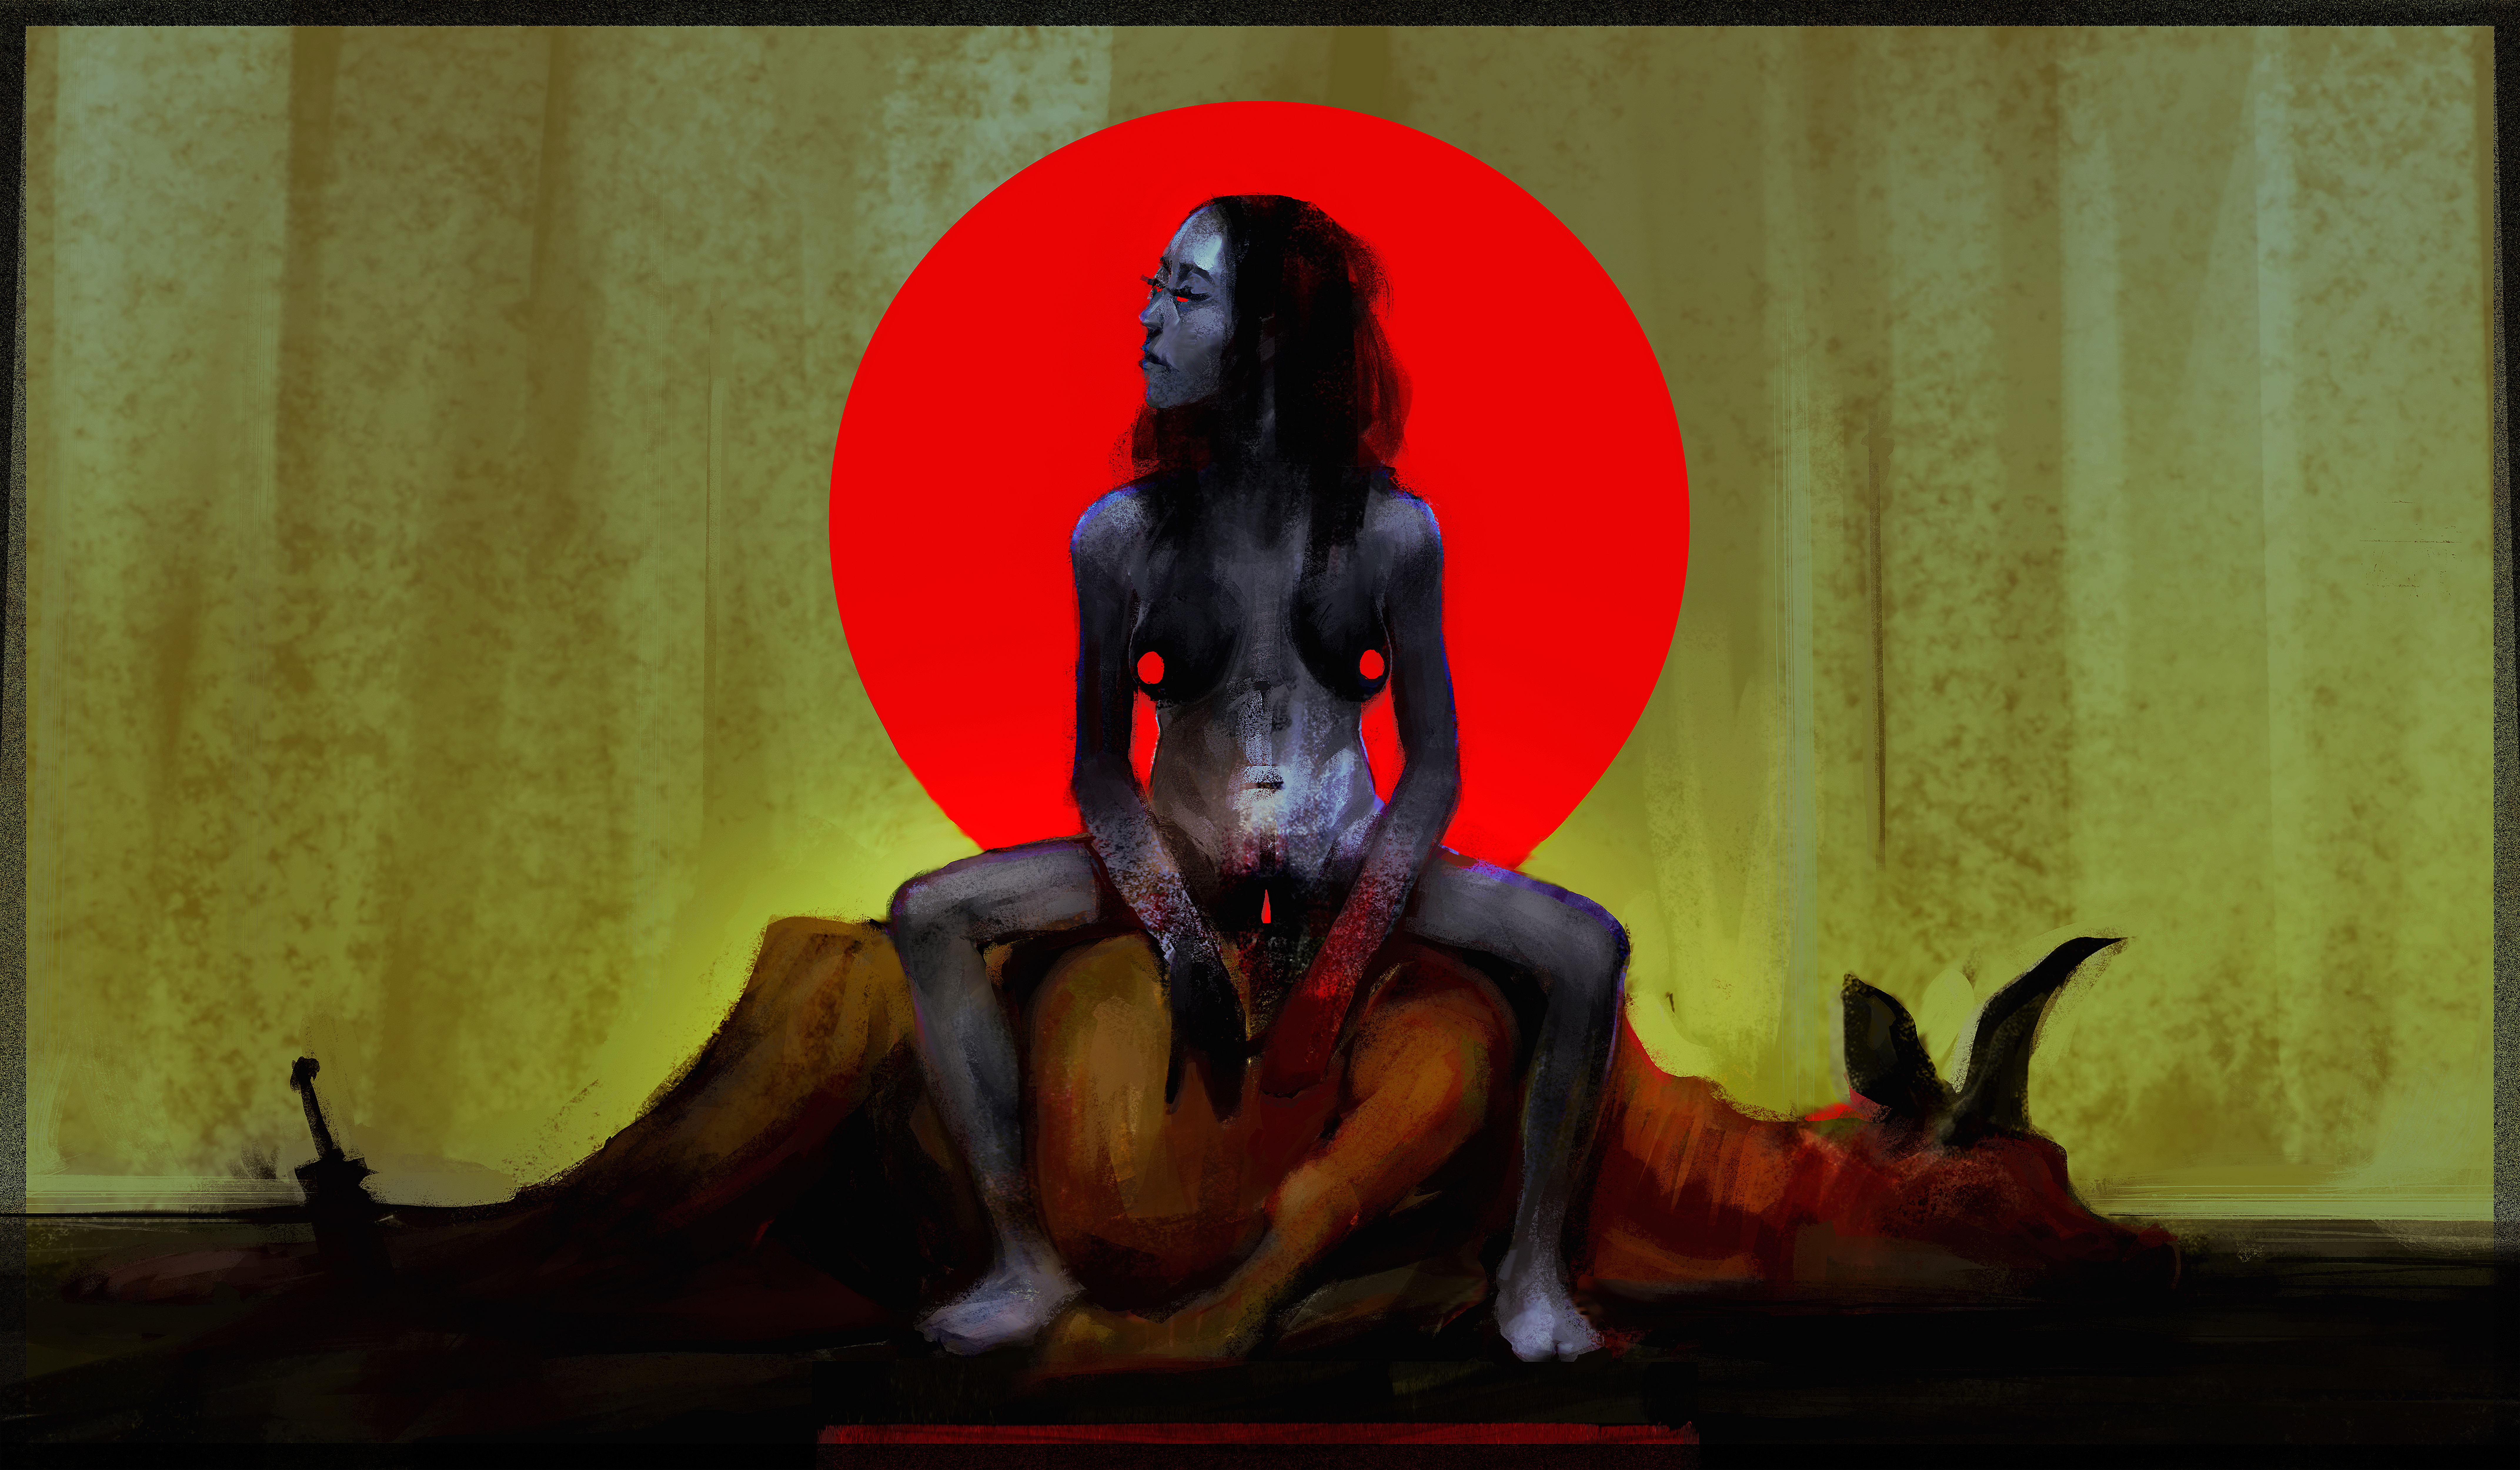 naked asian woman sitting on tree stump with red circle framing her body